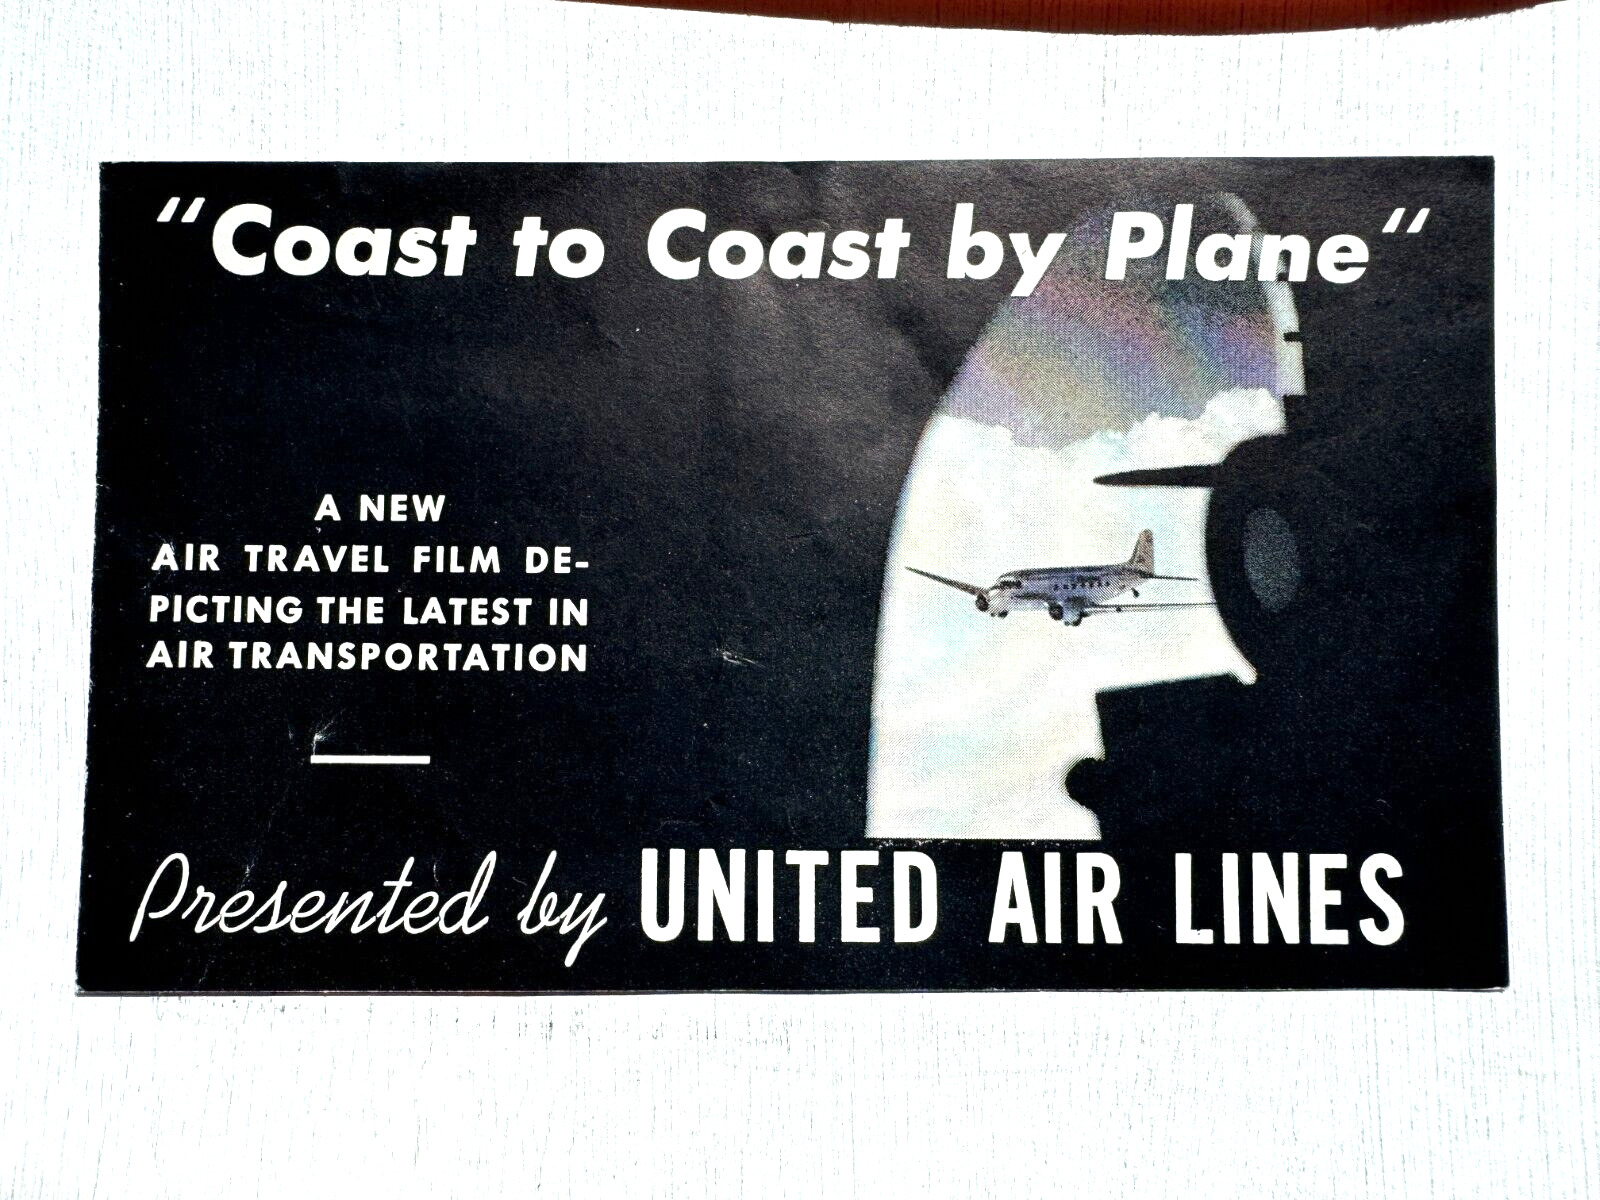 1938 United Airlines Invitation to Watch Airline Film \